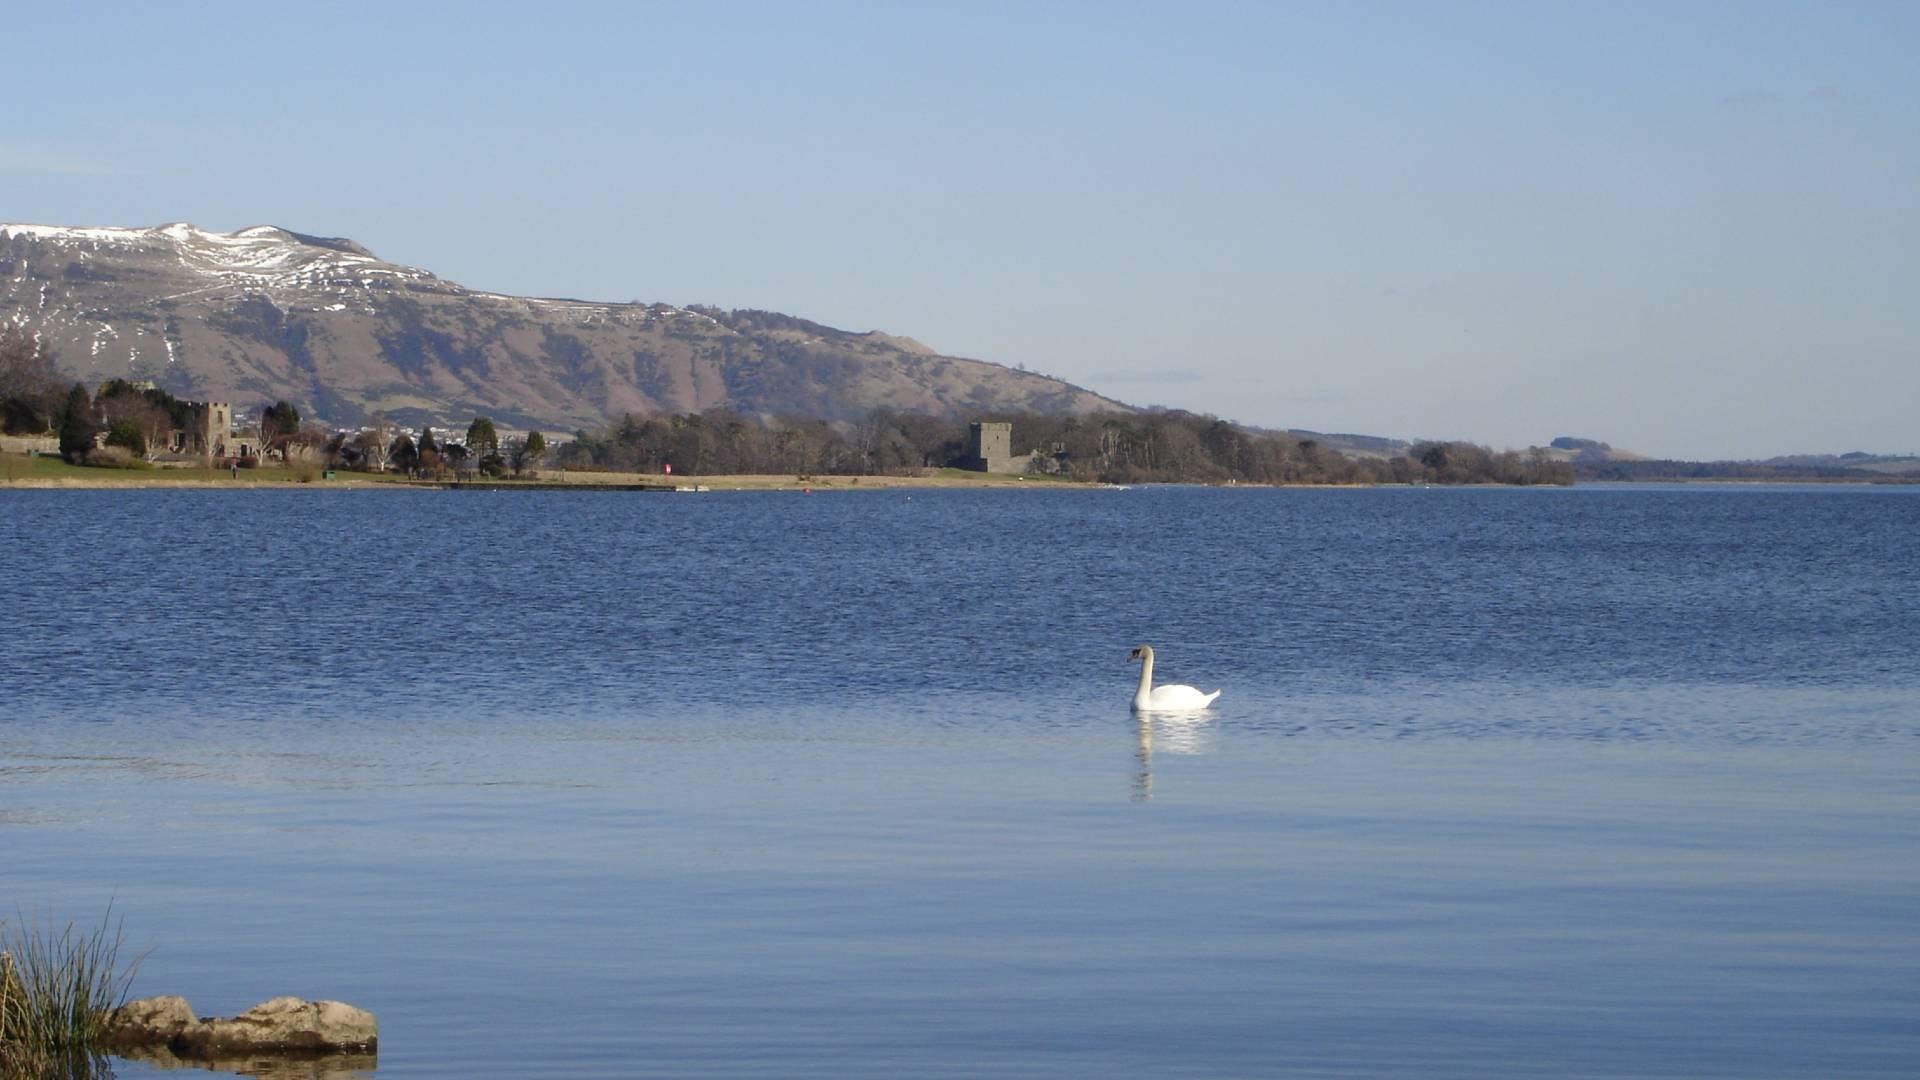 Loch Leven with a swan in foreground and the castle in the background